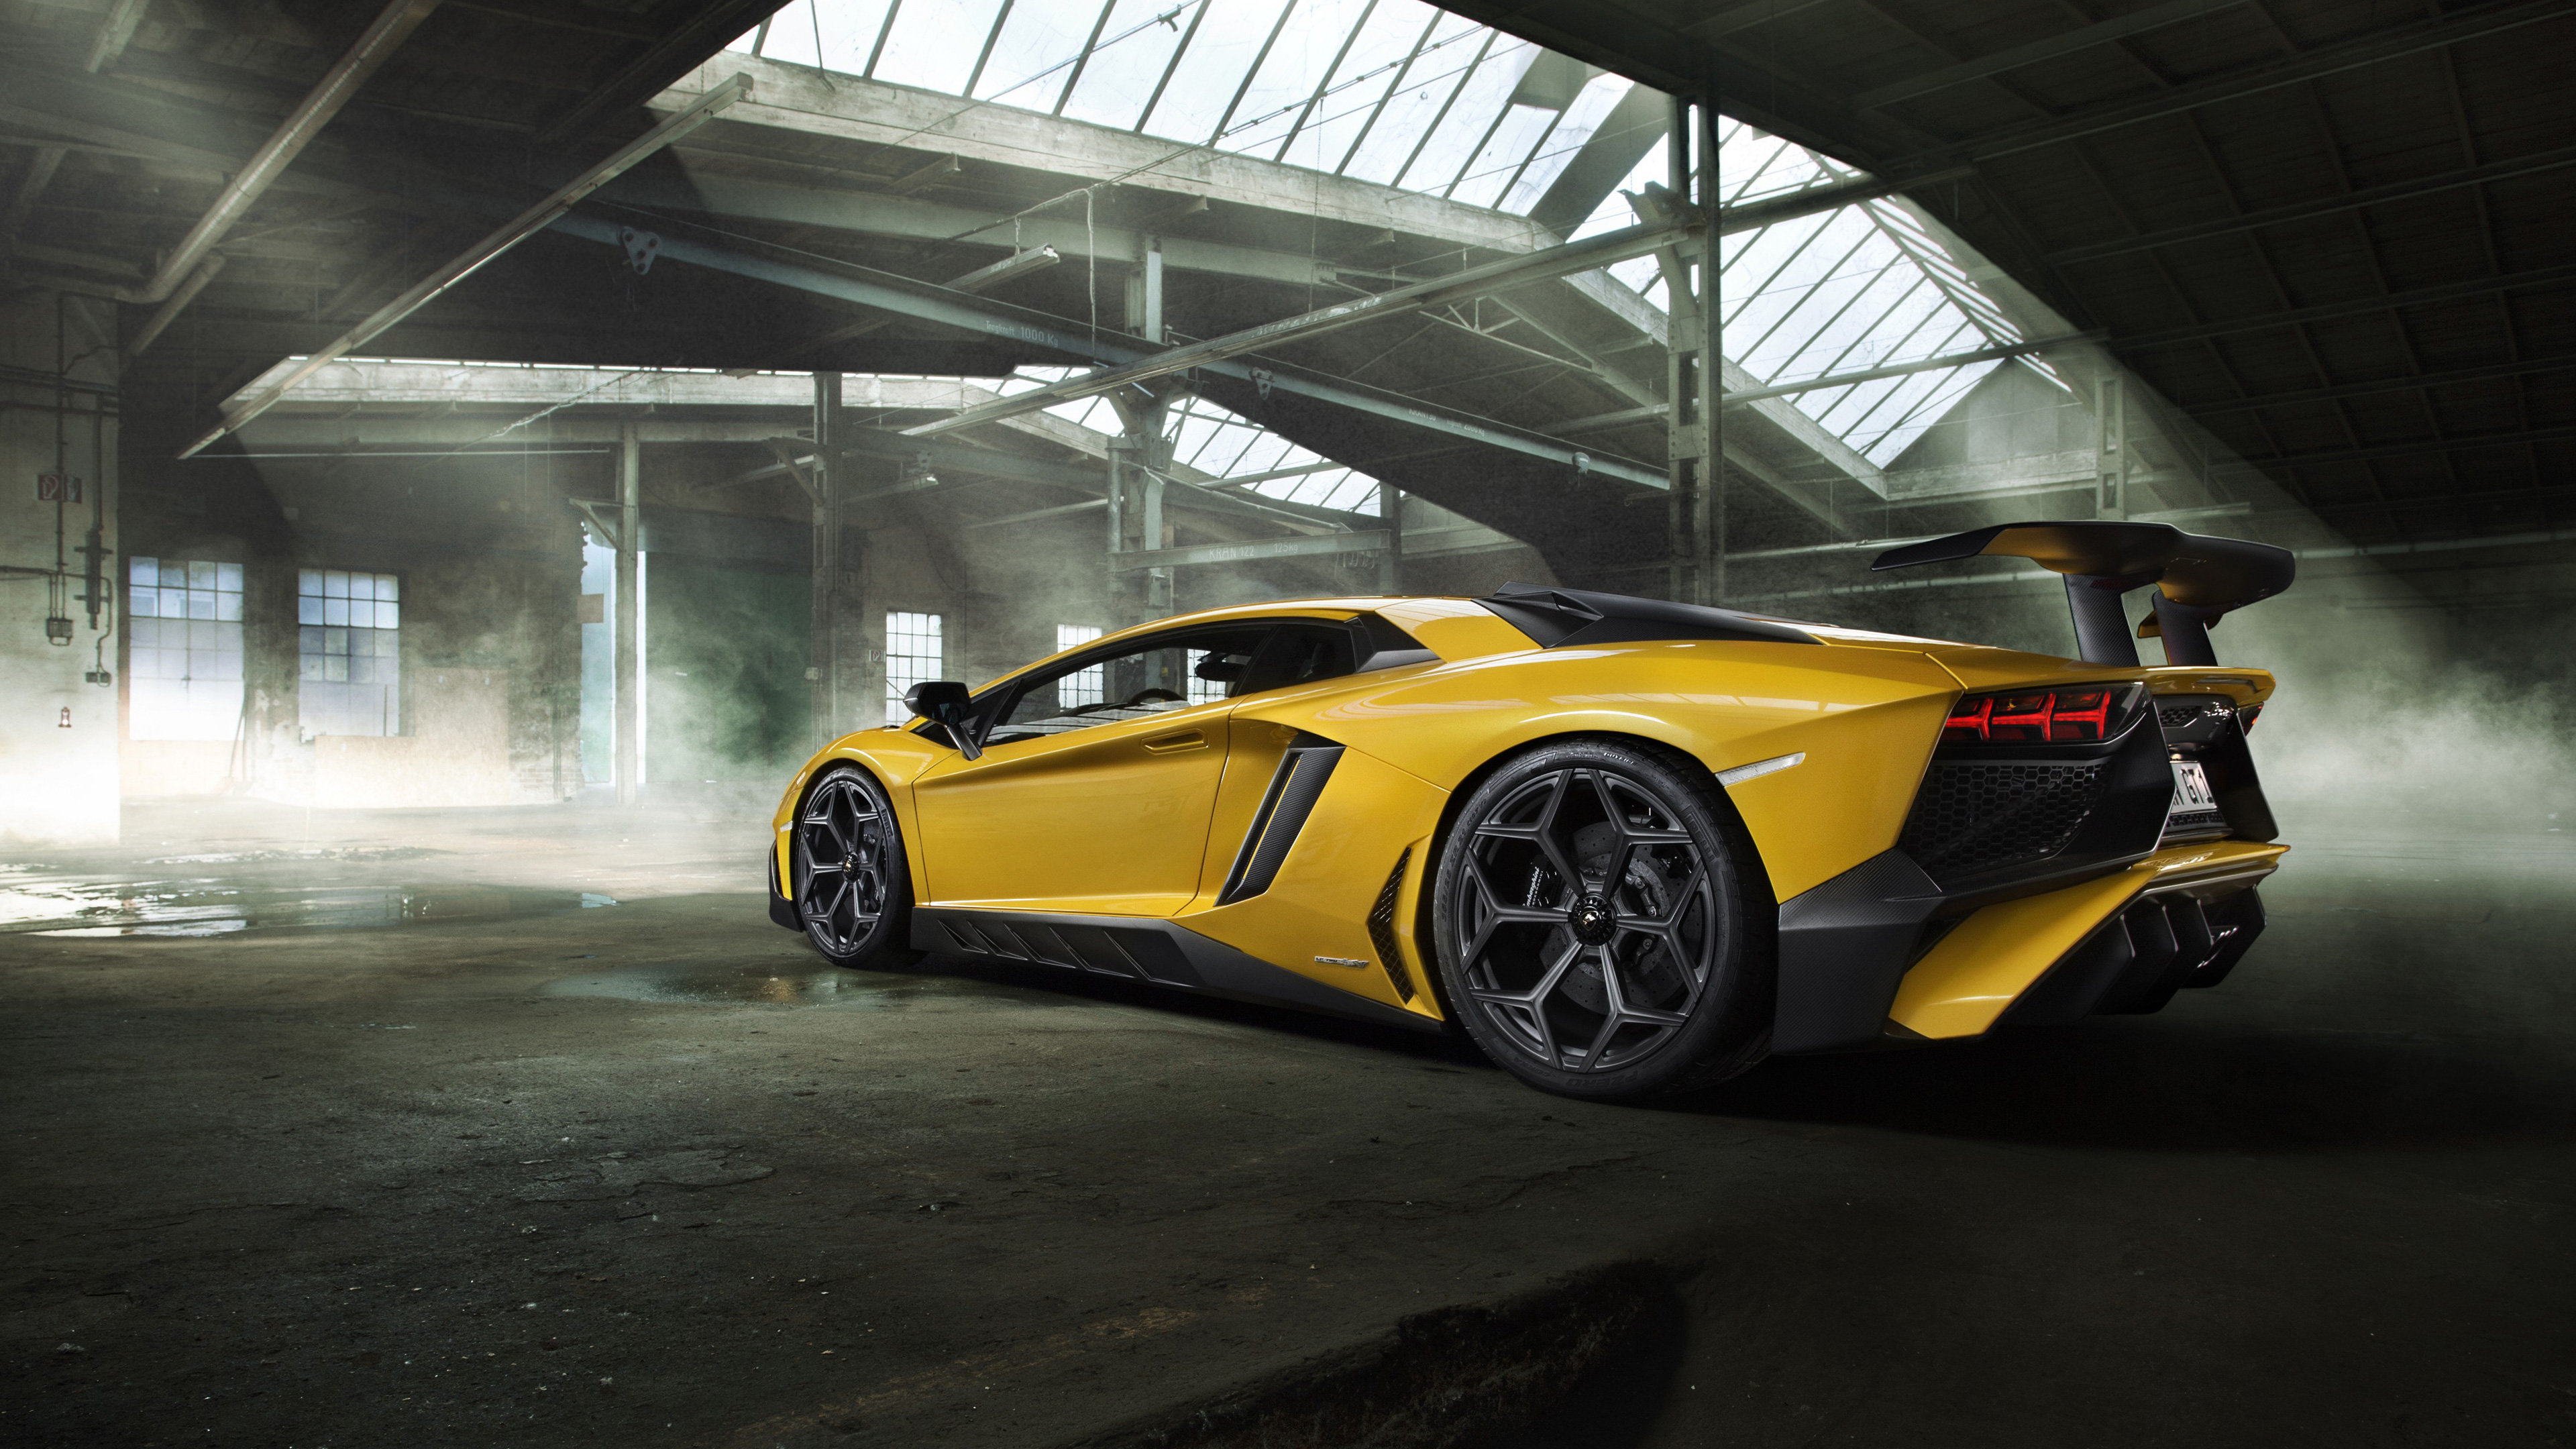 Lamborghini Aventador Superlove HD, HD Cars, 4k Wallpapers, Images,  Backgrounds, Photos and Pictures